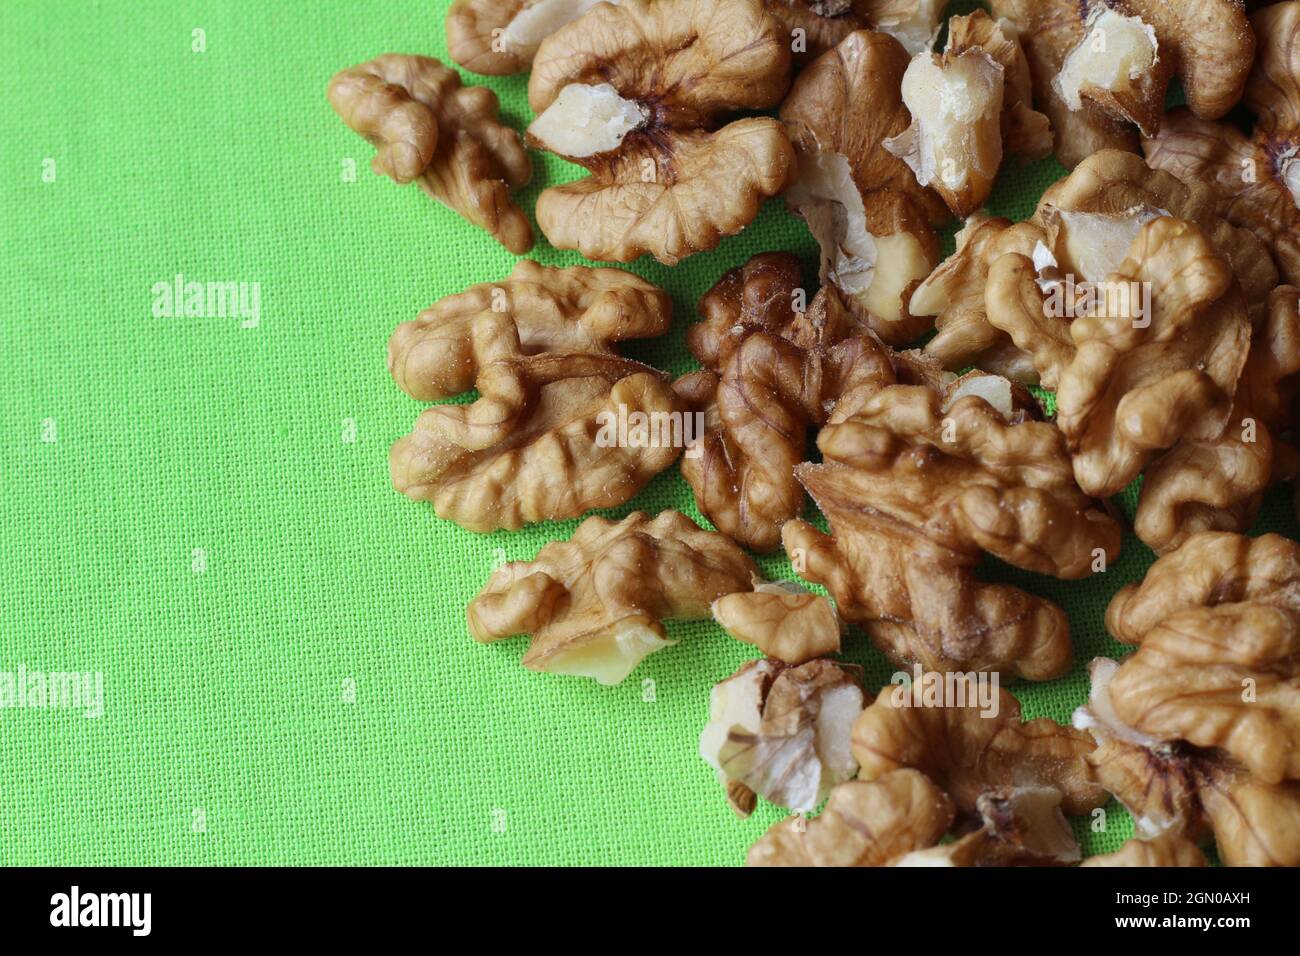 Top down view of shelled walnuts on a bright green table cloth. Nature food healthy snacks background, with copyspace to the left. Stock Photo